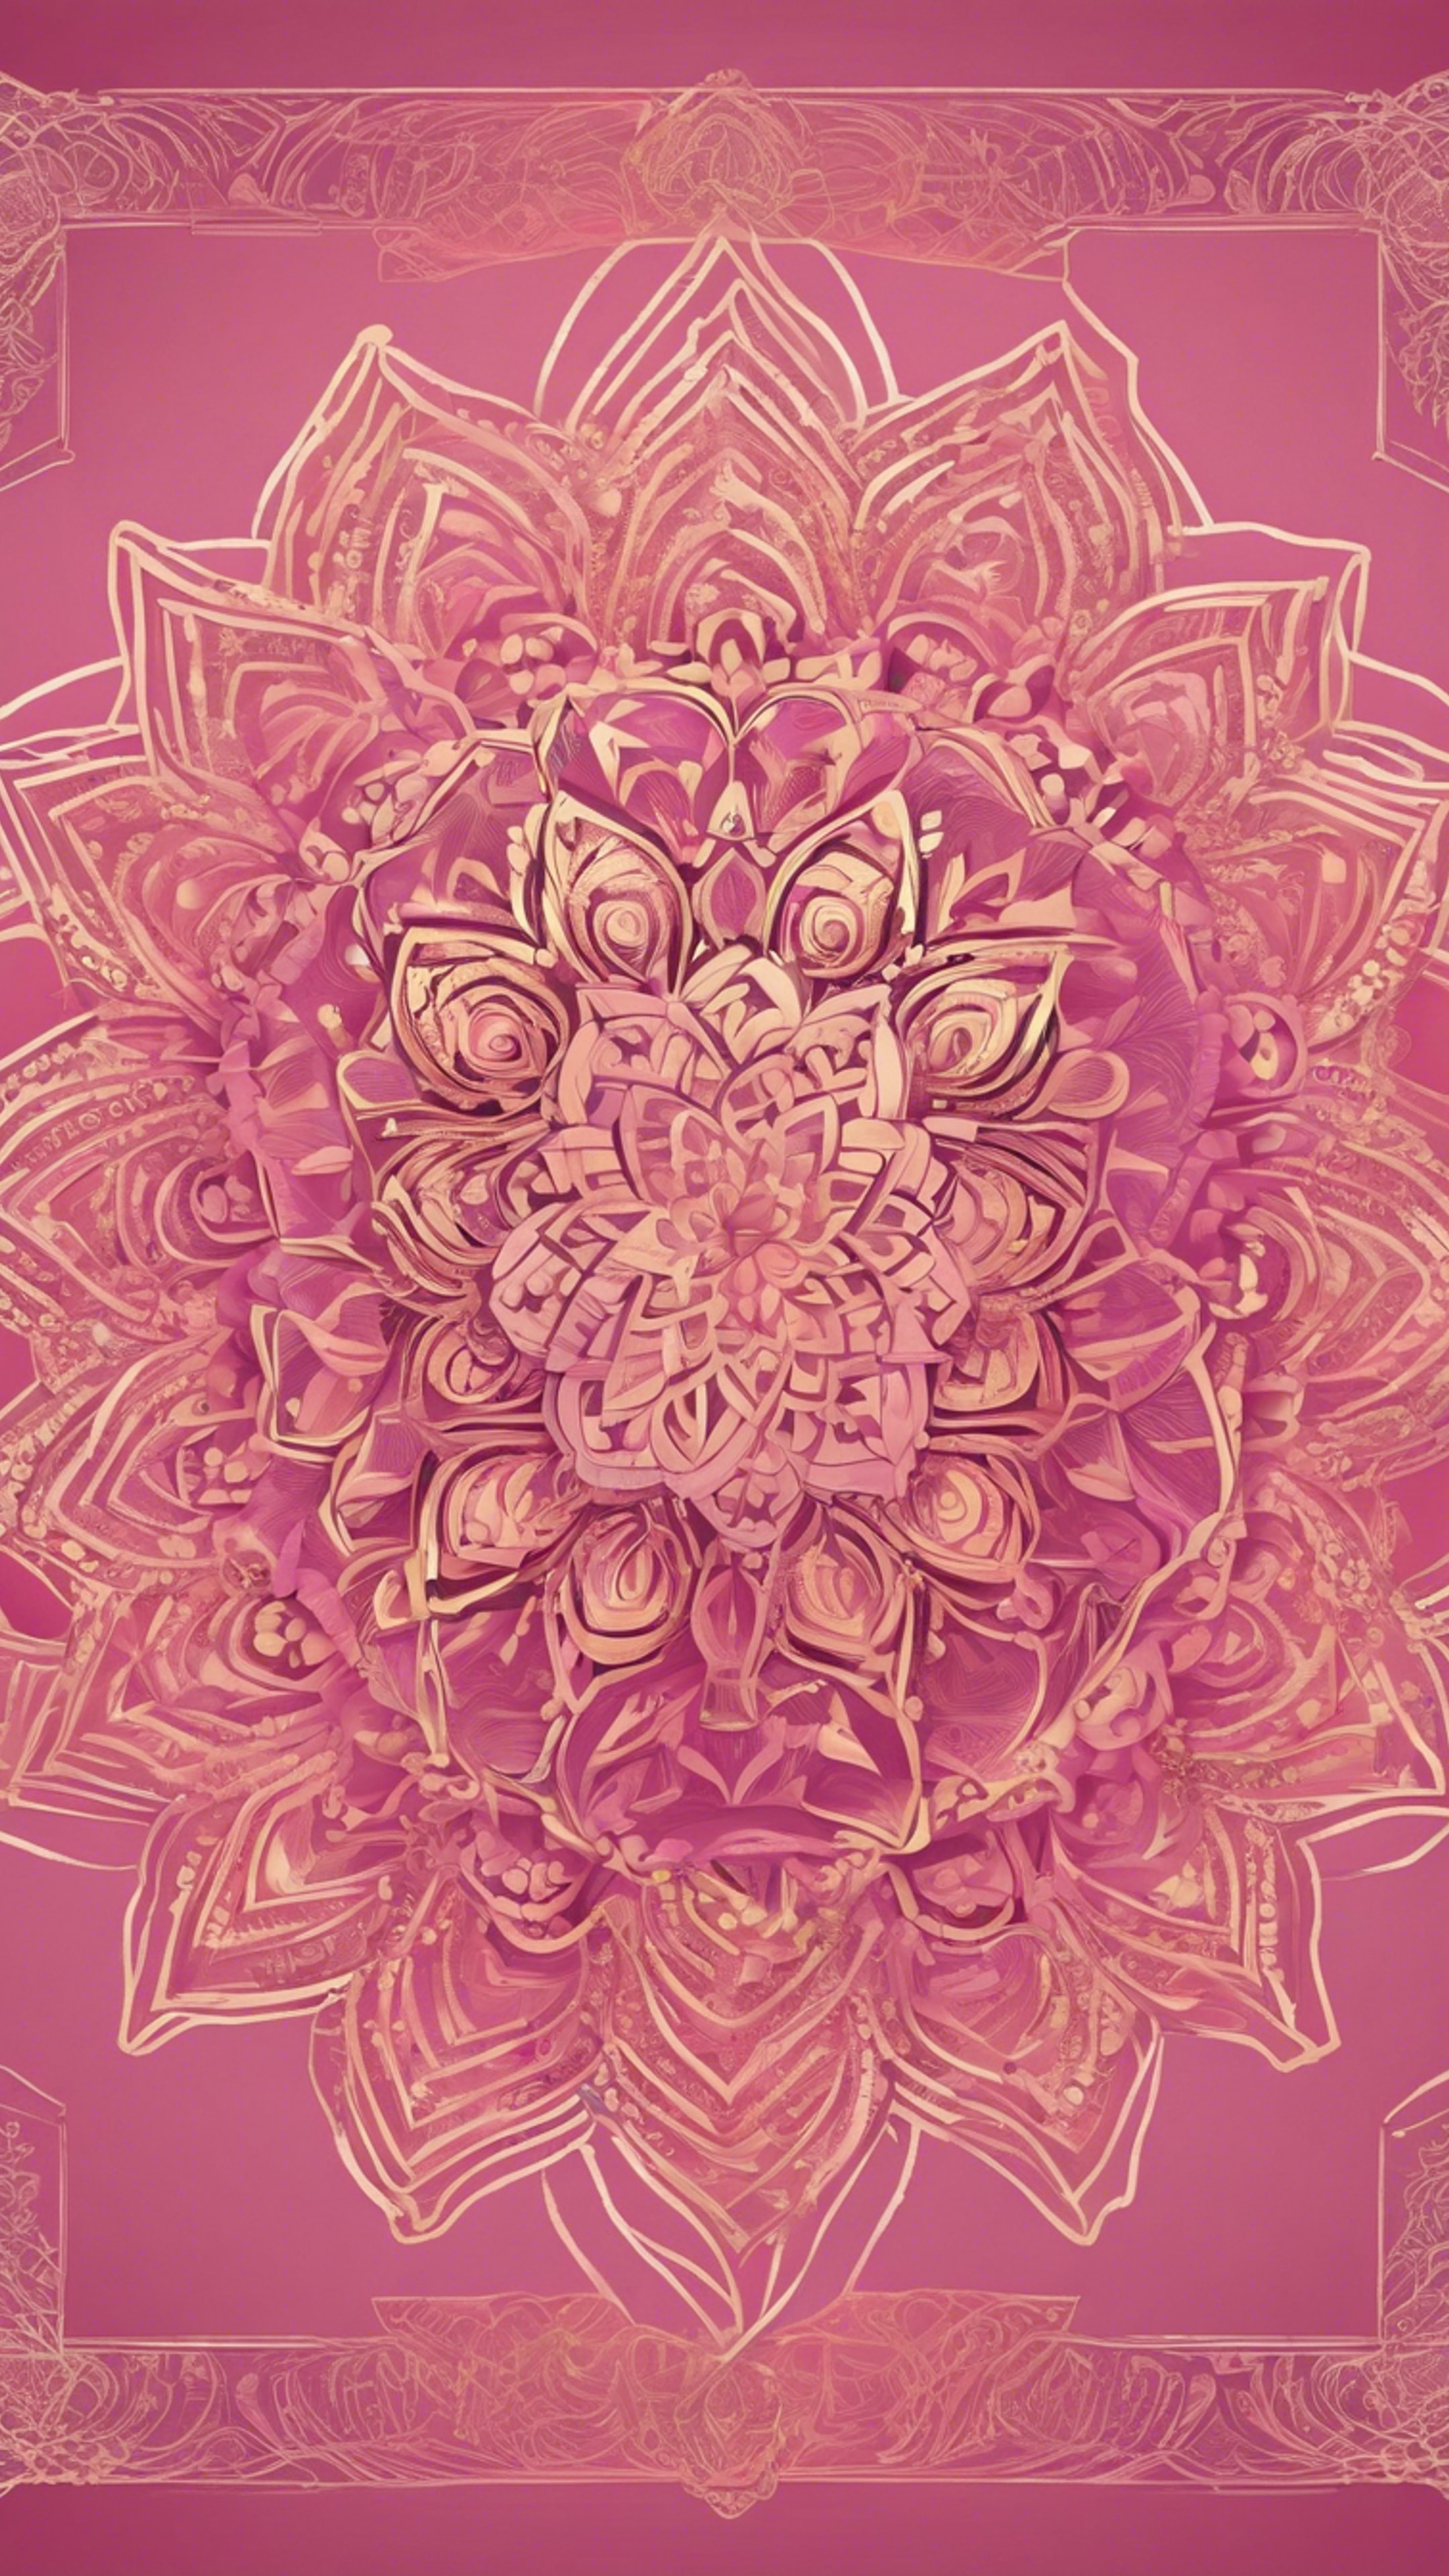 A pink and gold mandala design flourishing with intricate line art and vibrant colors. Обои[7f3fcd6ed997428c89d3]